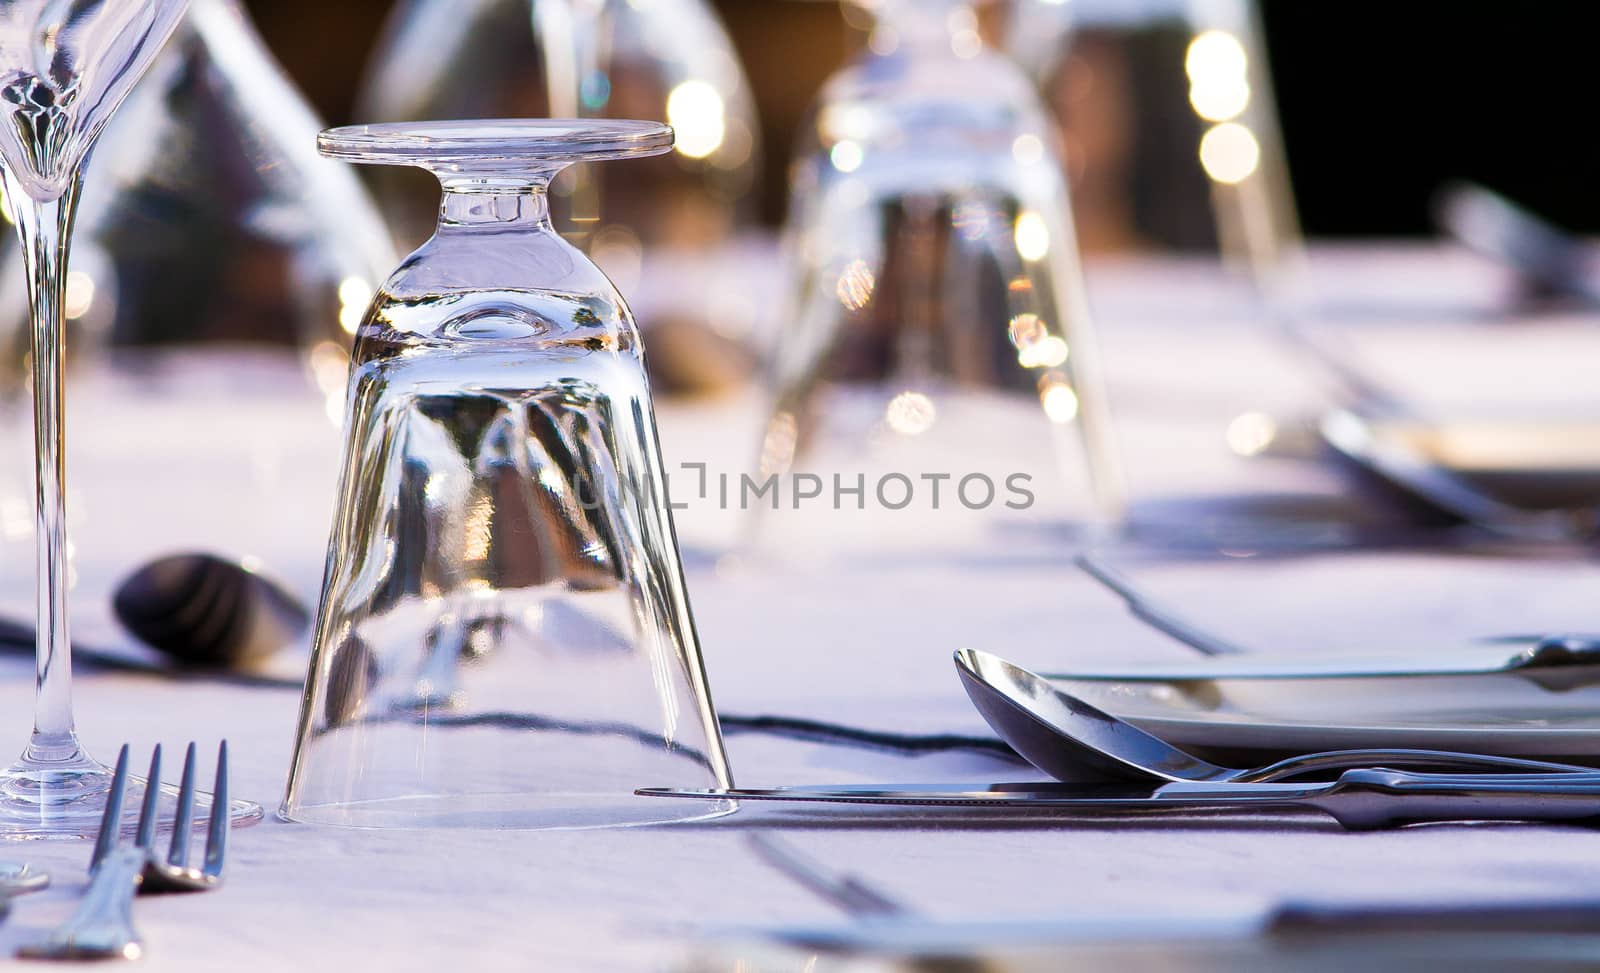 Beautifull restaurant setting of glasses and cutlery on a table